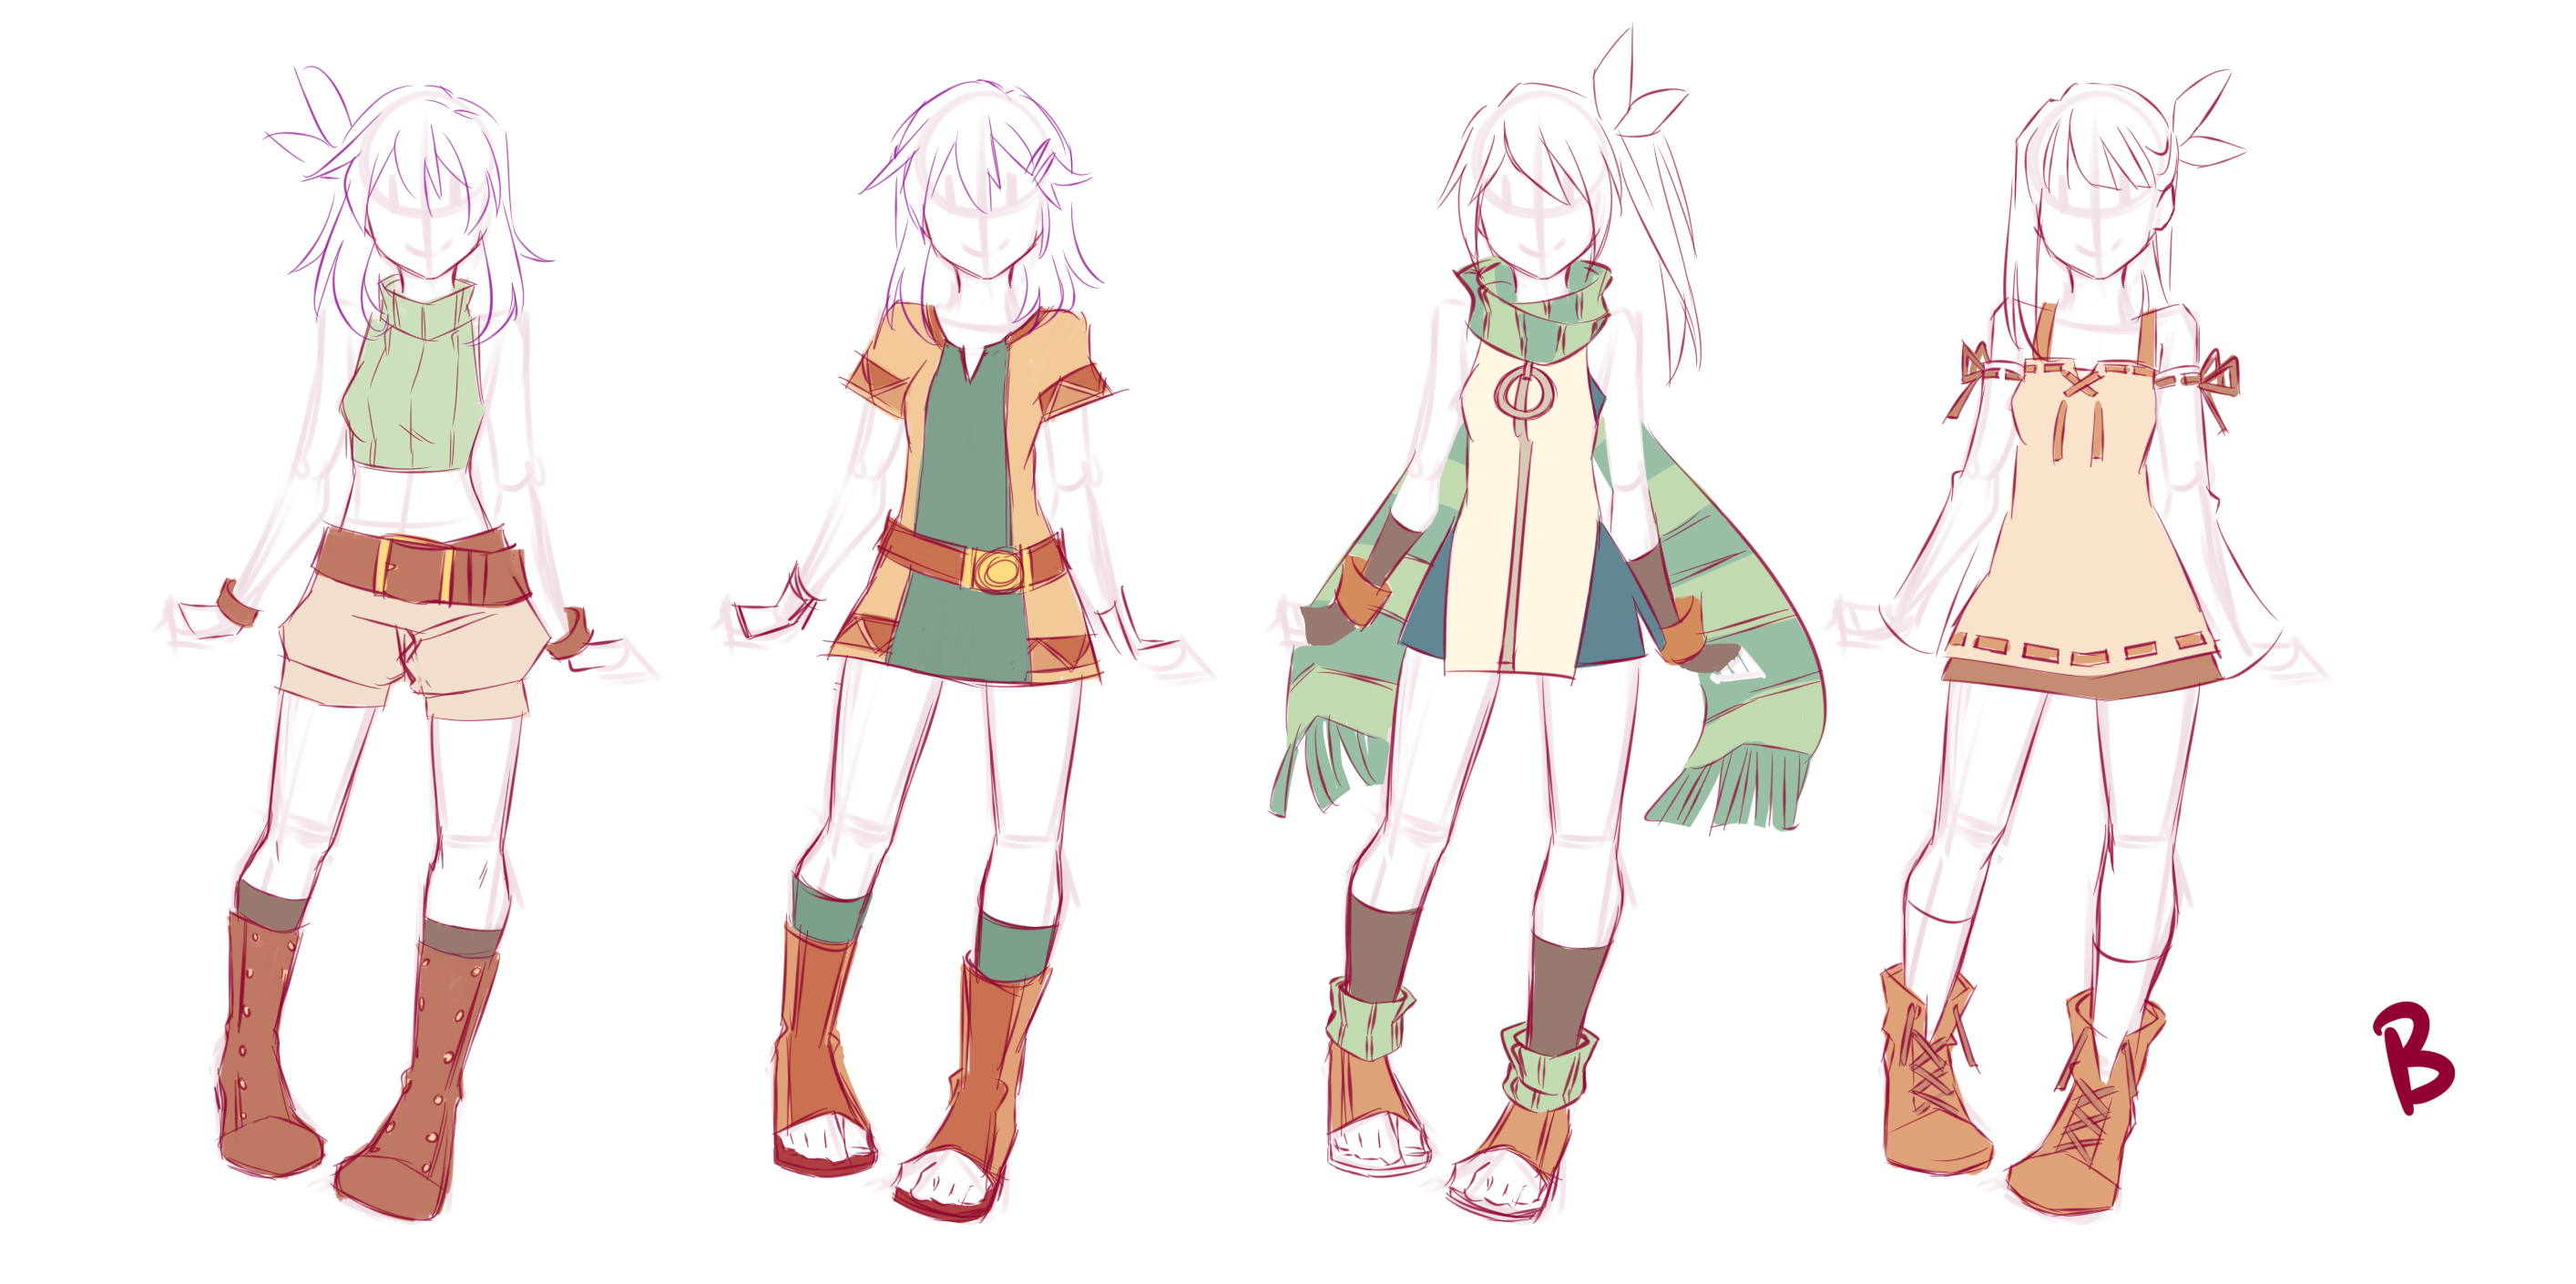 Sketches of four more character designs